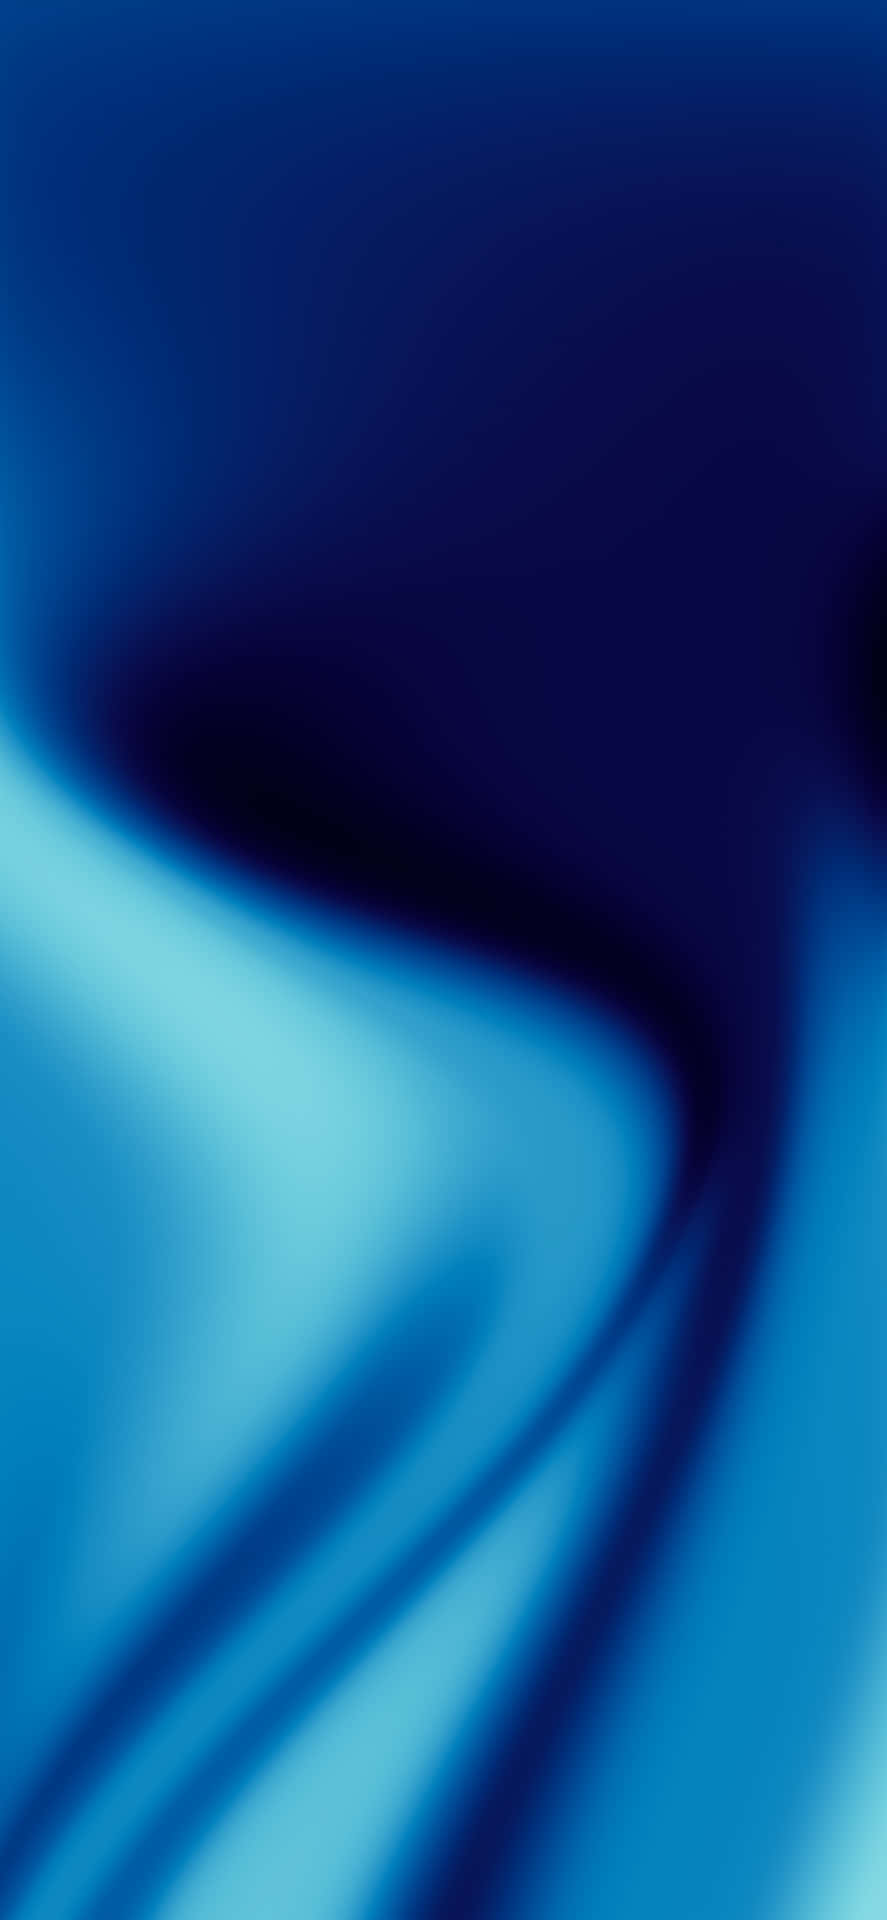 A Blue Background With A Wave Pattern Wallpaper